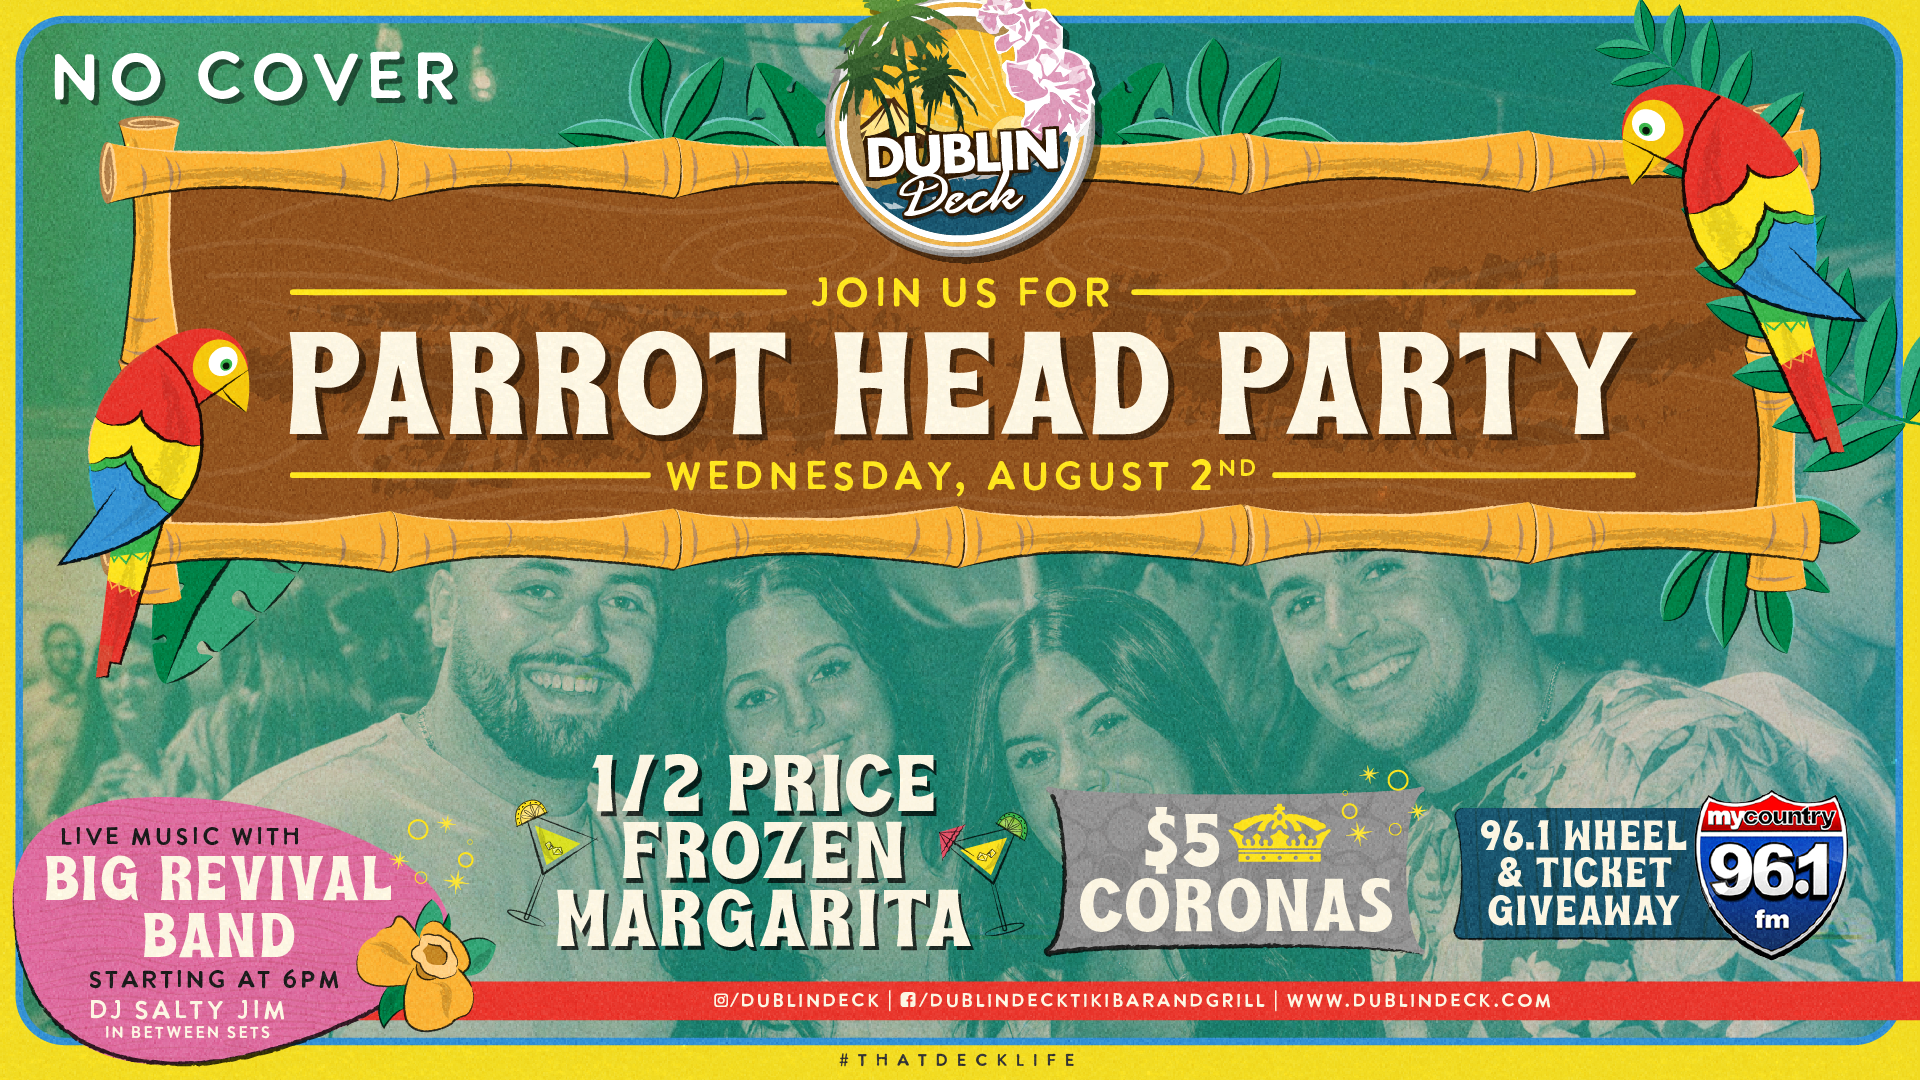 Join us for a midsummer Humpday Hoedown Parrot Head Party with Big Revival Band! We'll have drink specials, games, and giveaways with mycountry 96.1 all night!